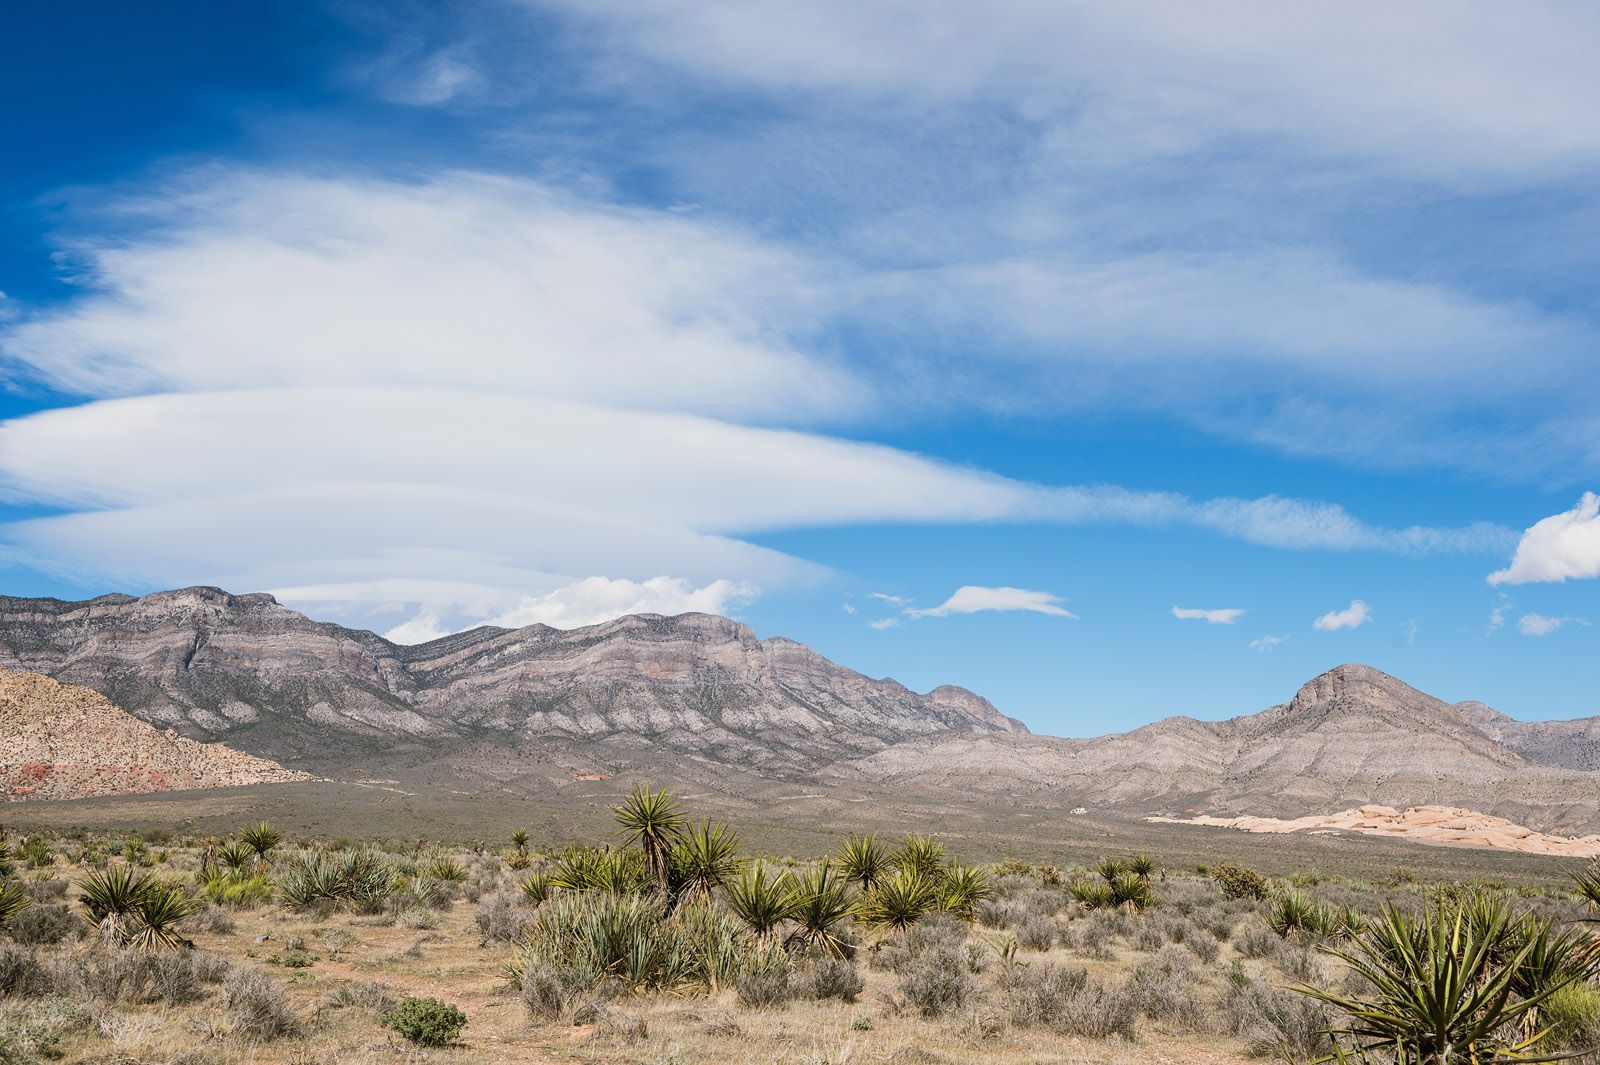 Fantastic cloud structure in Red Rock Canyon, Nevada, USA.